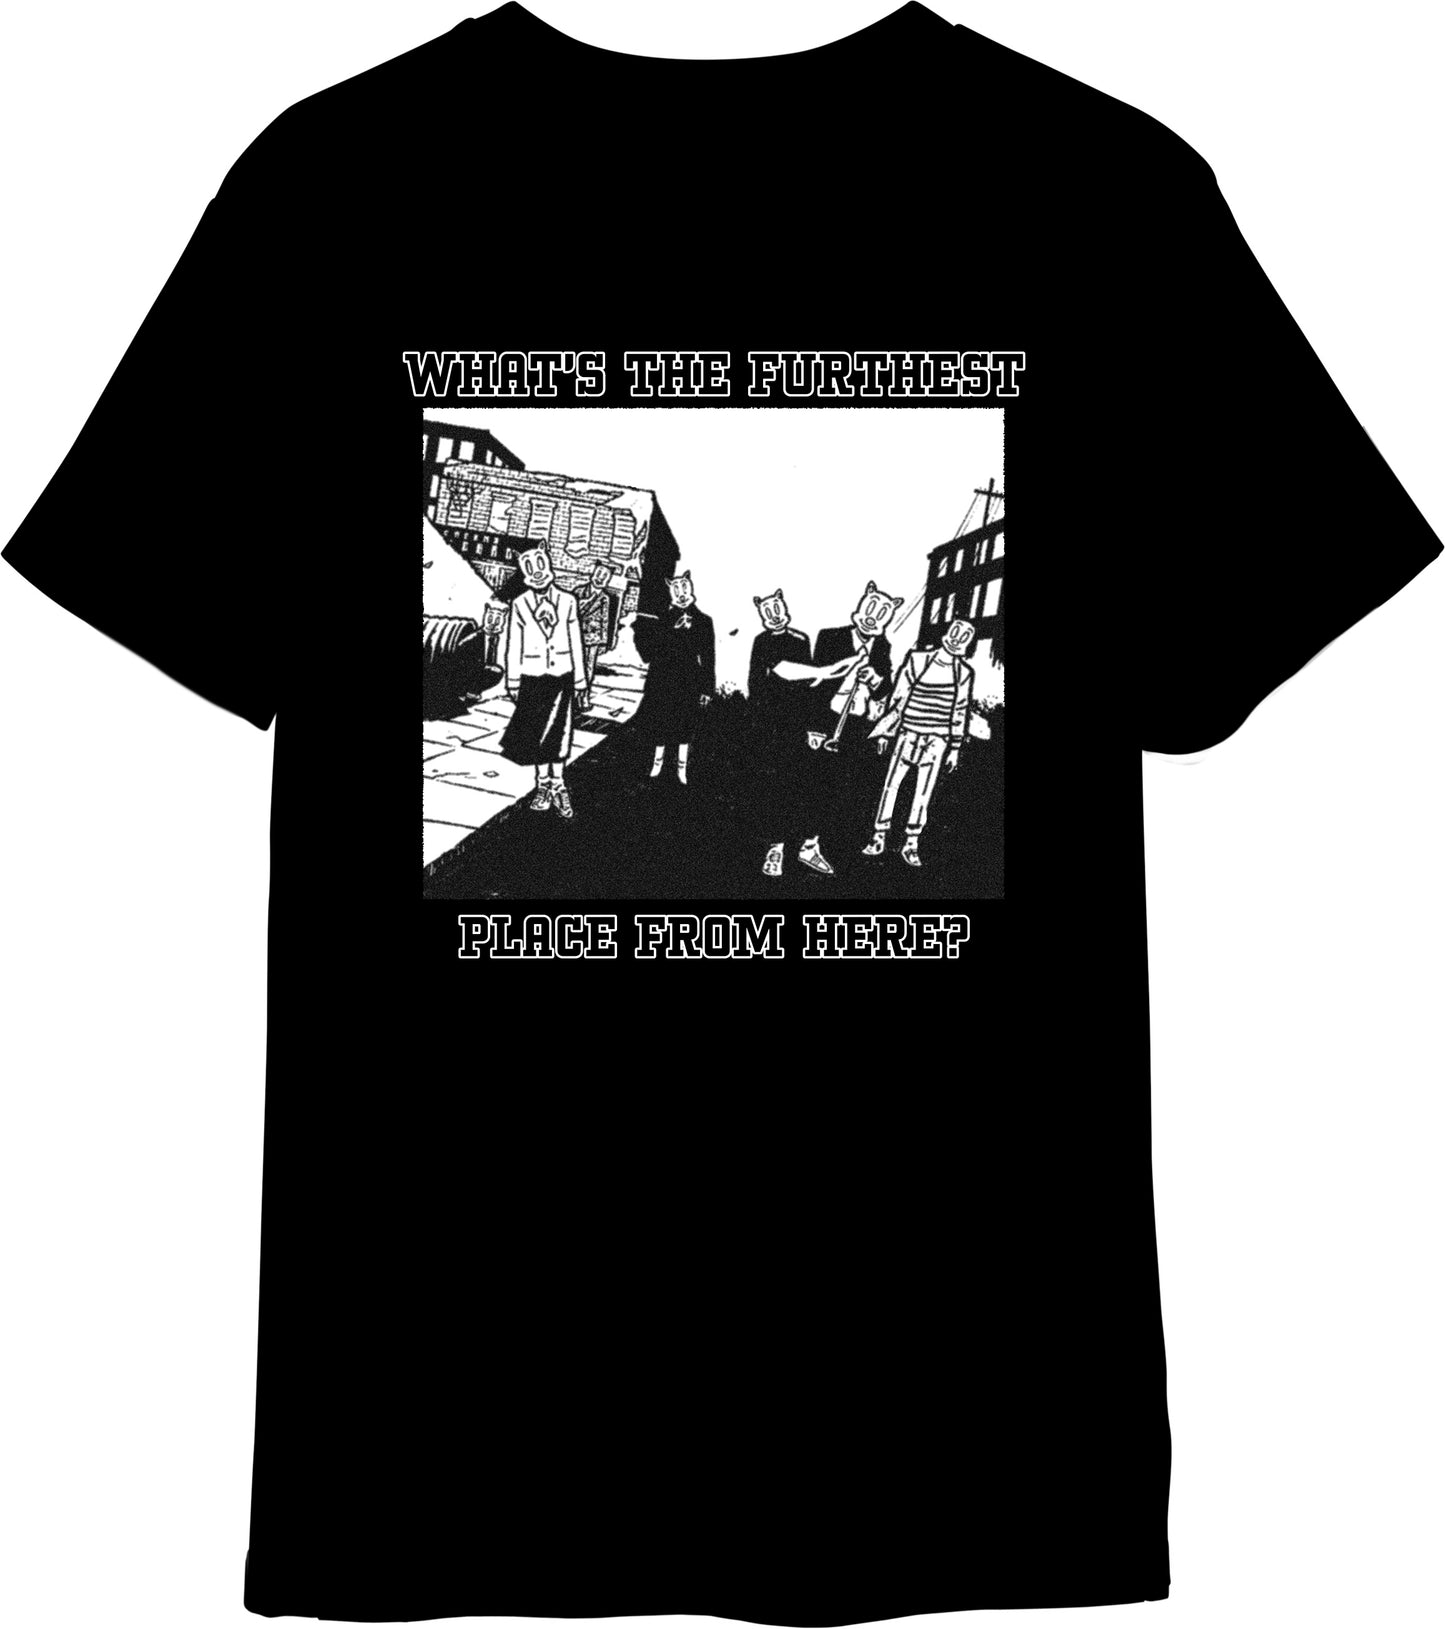 WTFPFH Youth Crew Shirt.